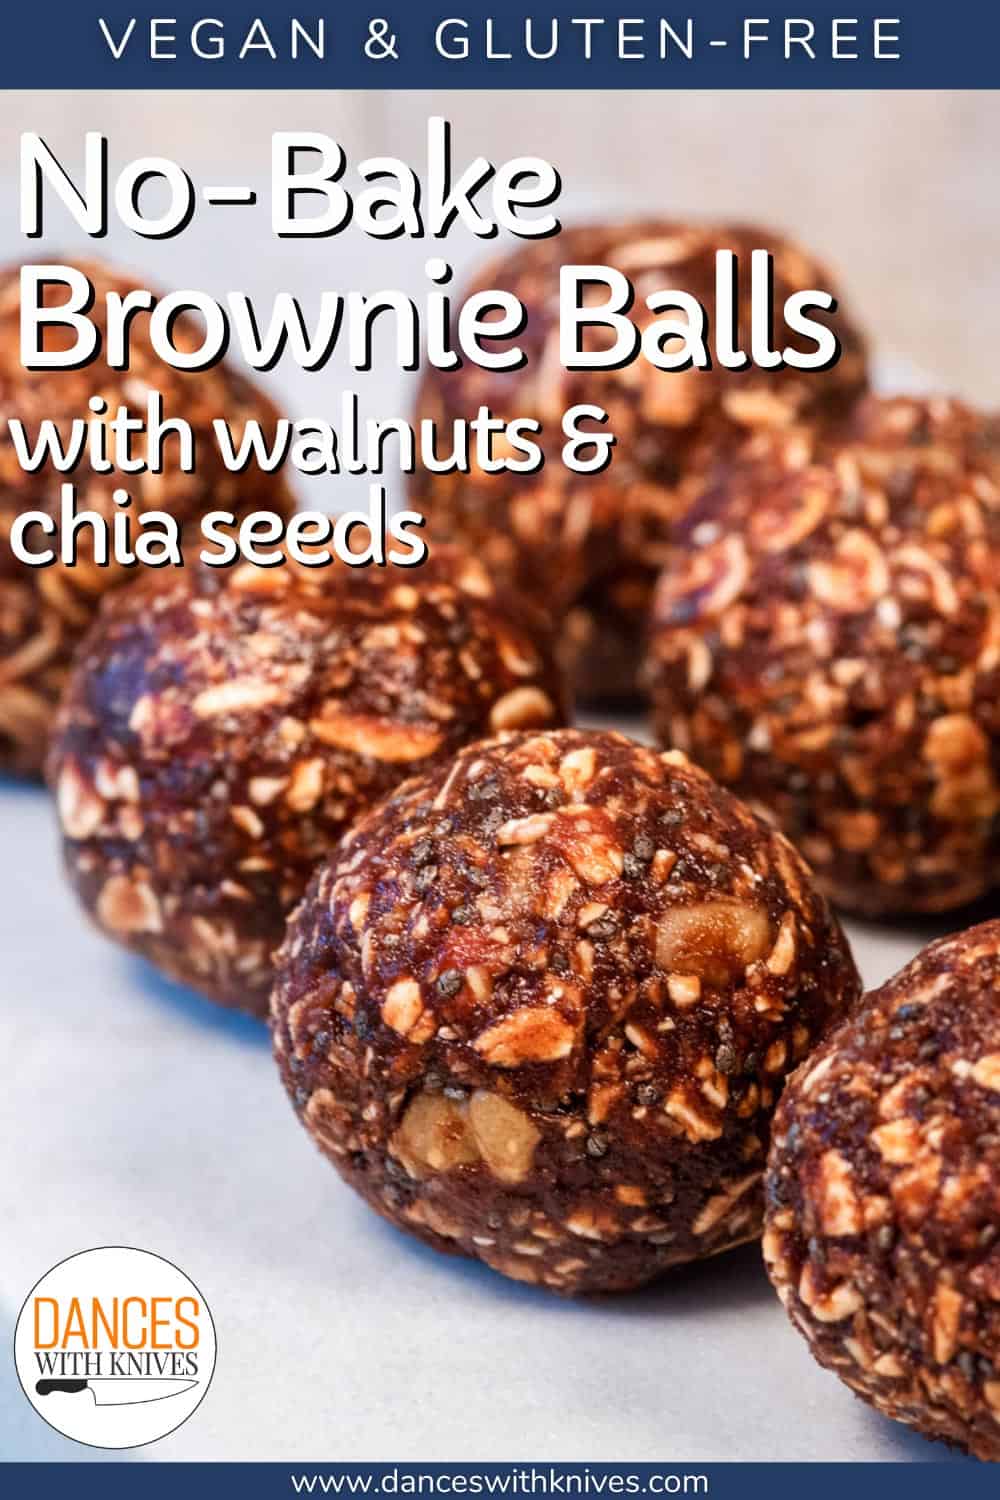 No-Bake Brownie Balls with Walnuts and Chia Seeds | Dances with Knives